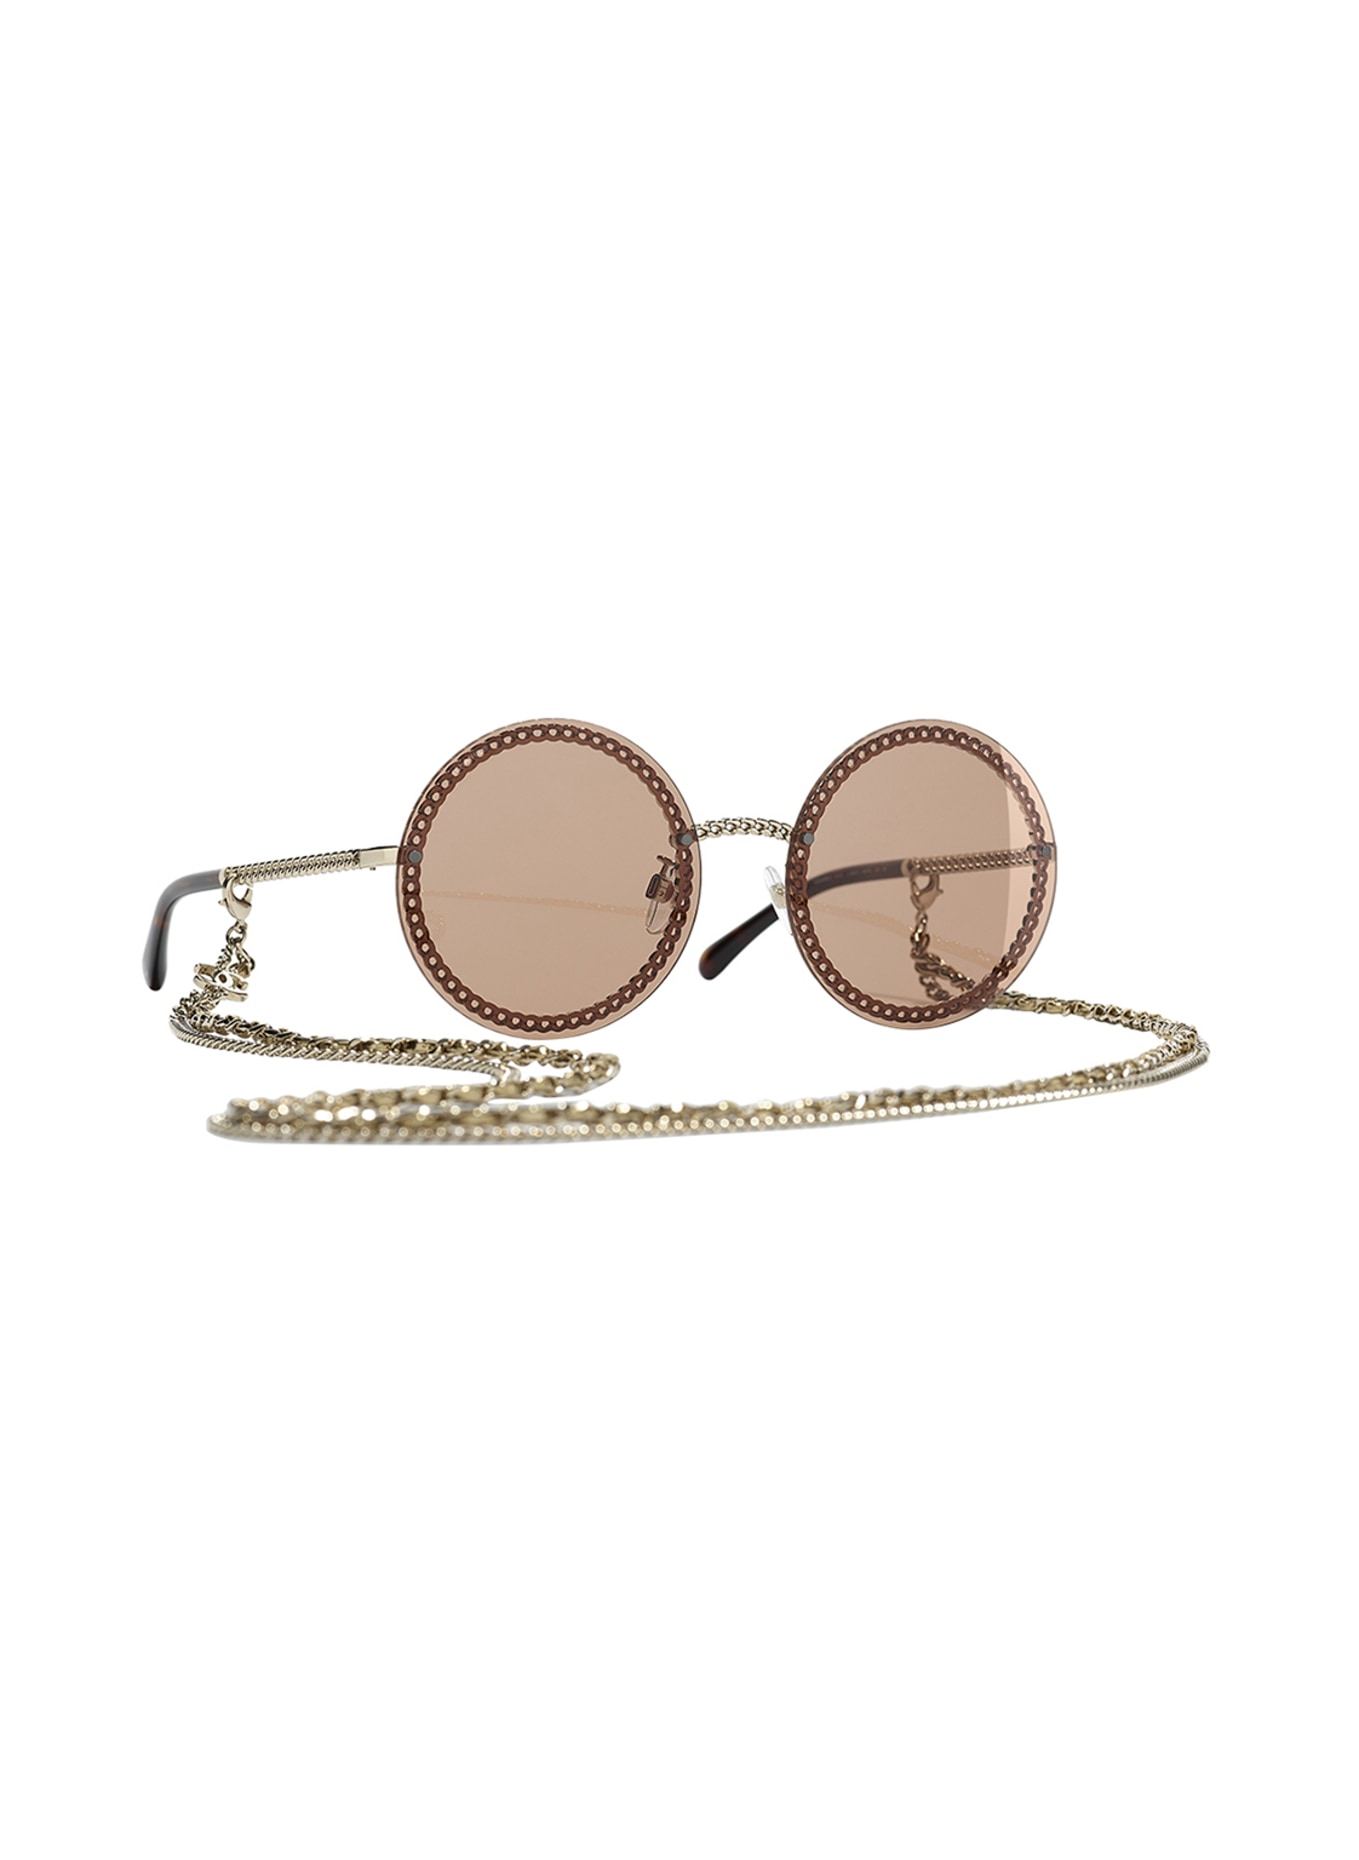 Sunglasses Chanel  Chain embellished brown squared sunglasses  CH4244C3953